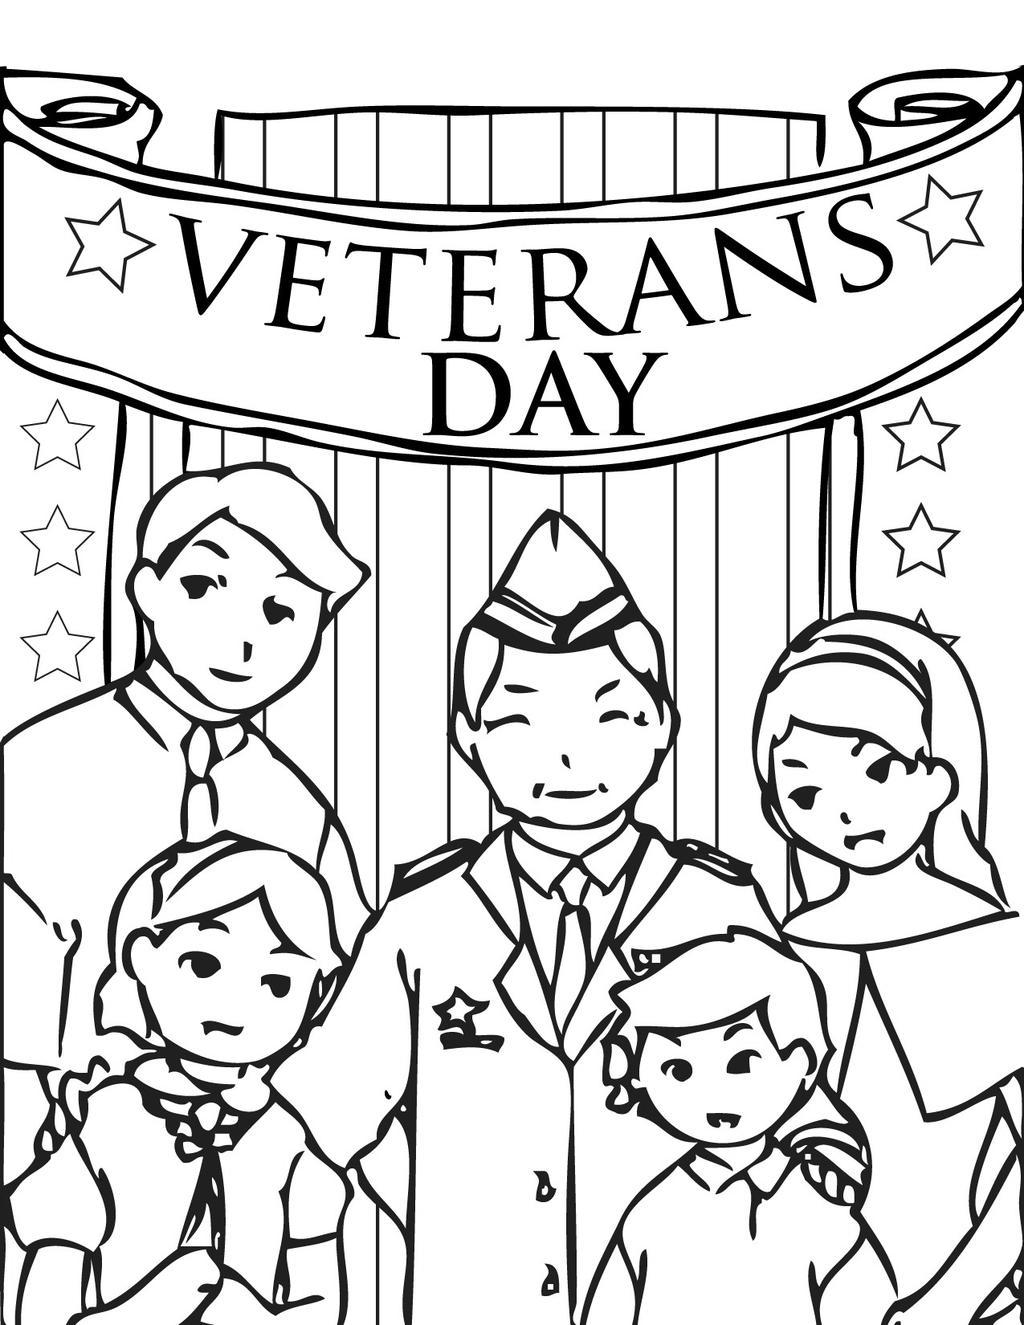 Free Veterans Day Coloring Pages My Family printable